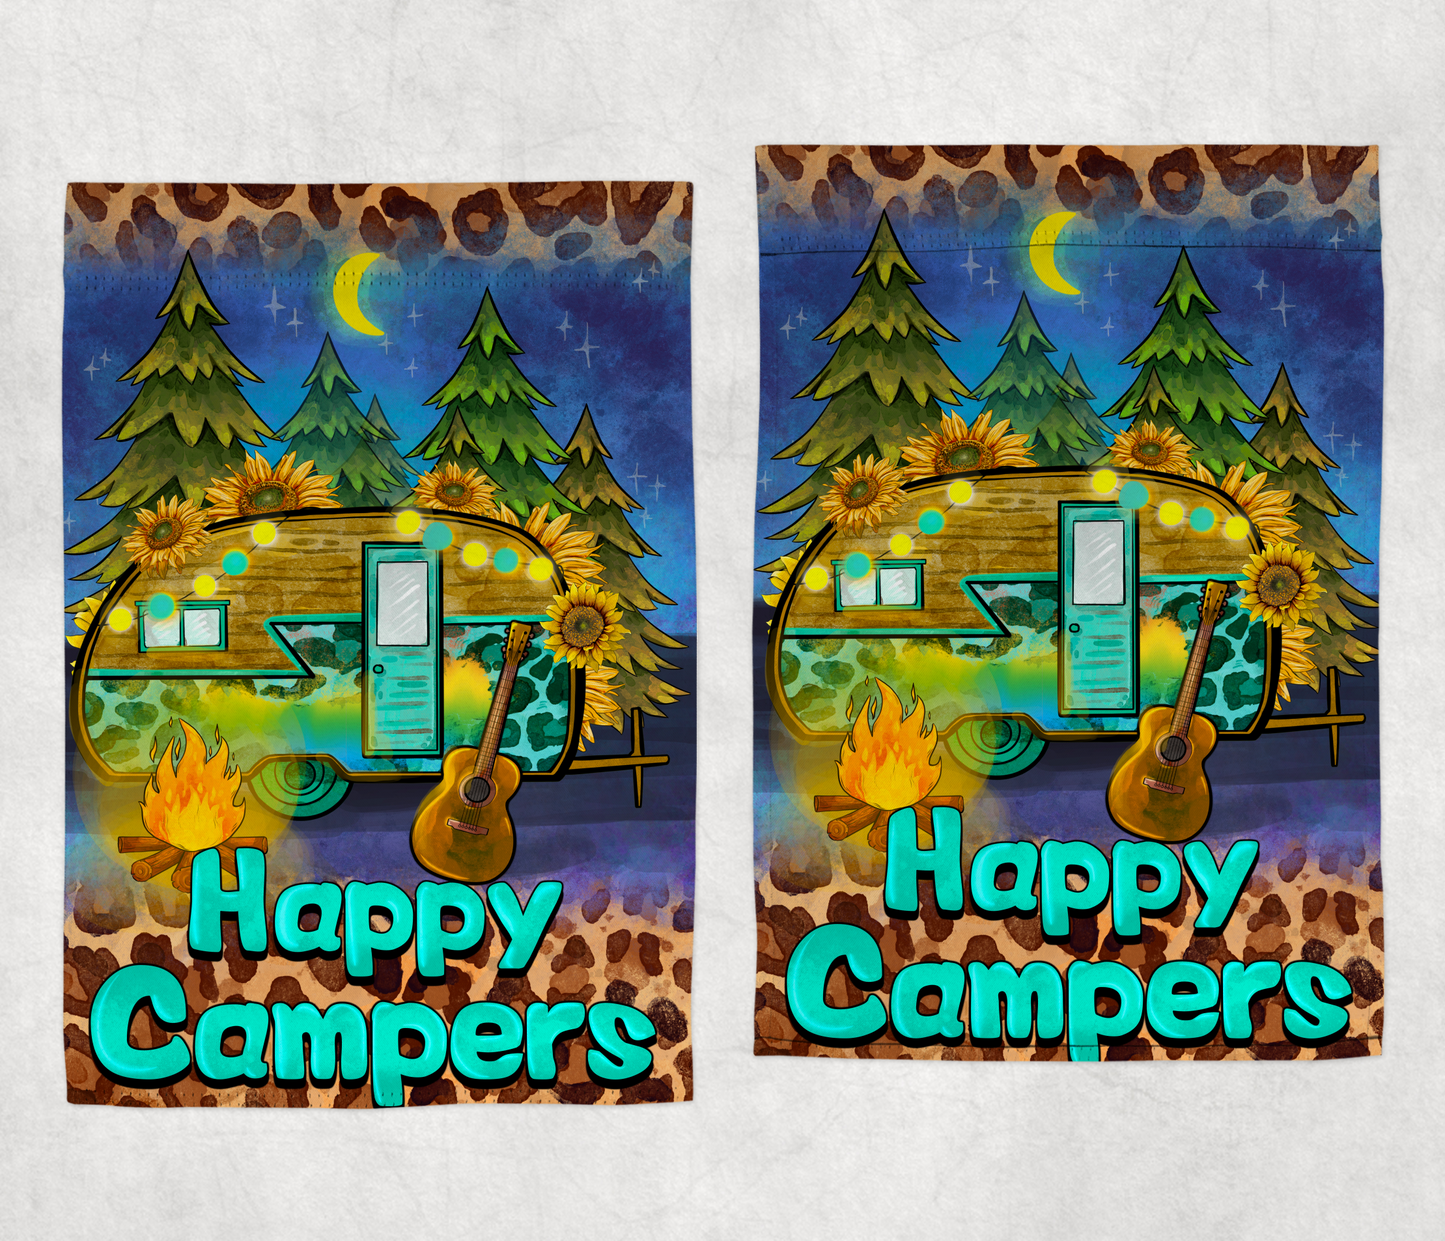 12X18 Garden Flags Double Sided Polyester Camping SKU#12X18DSPCGF